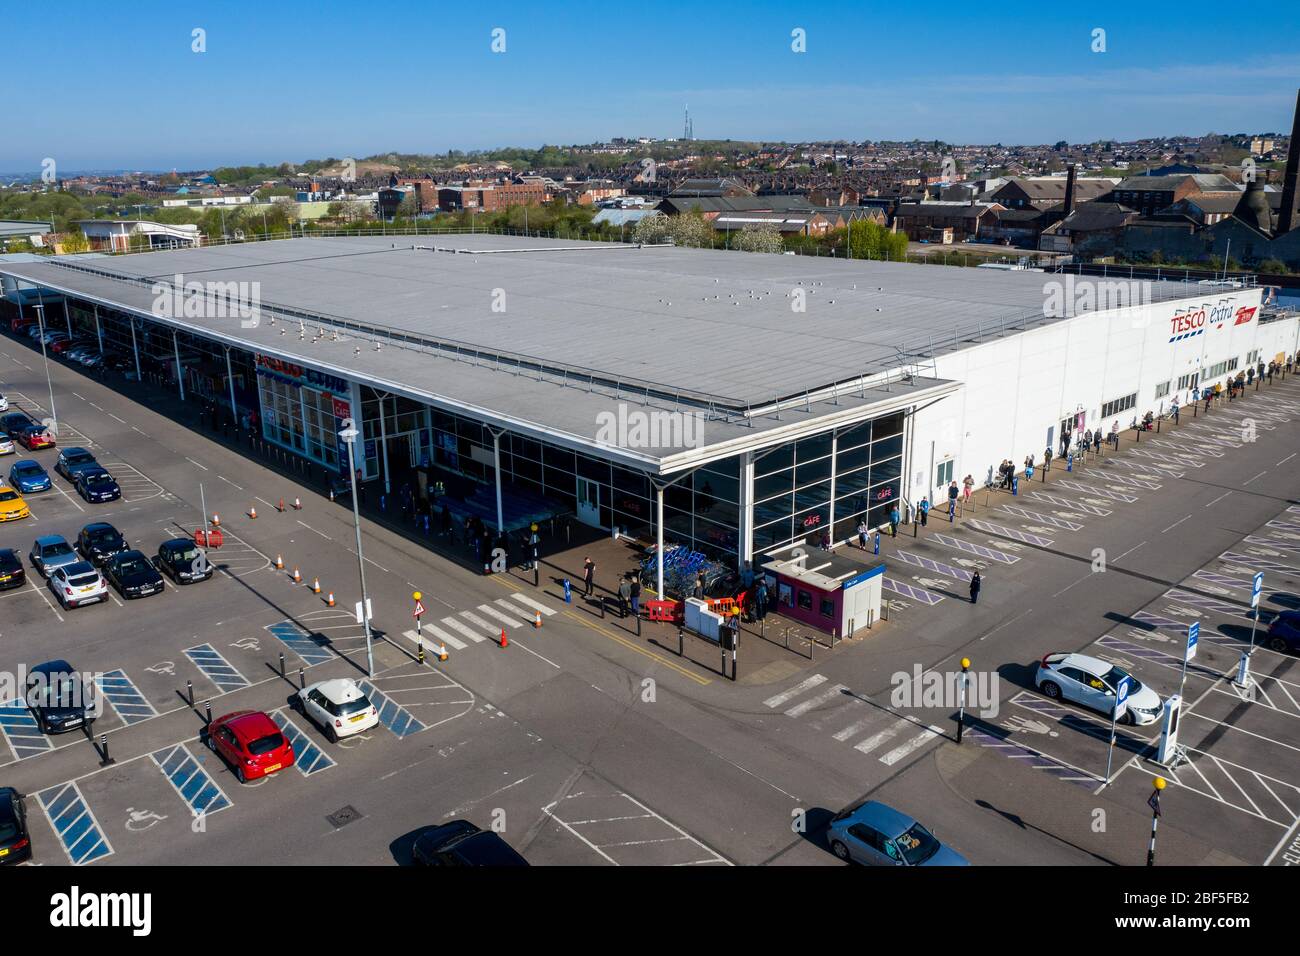 People queue 2 metres apart for a long distance outside of the Tesco extra store in Longton, Stoke on Trent, Social distancing, Covid 19, Coronavirus Stock Photo